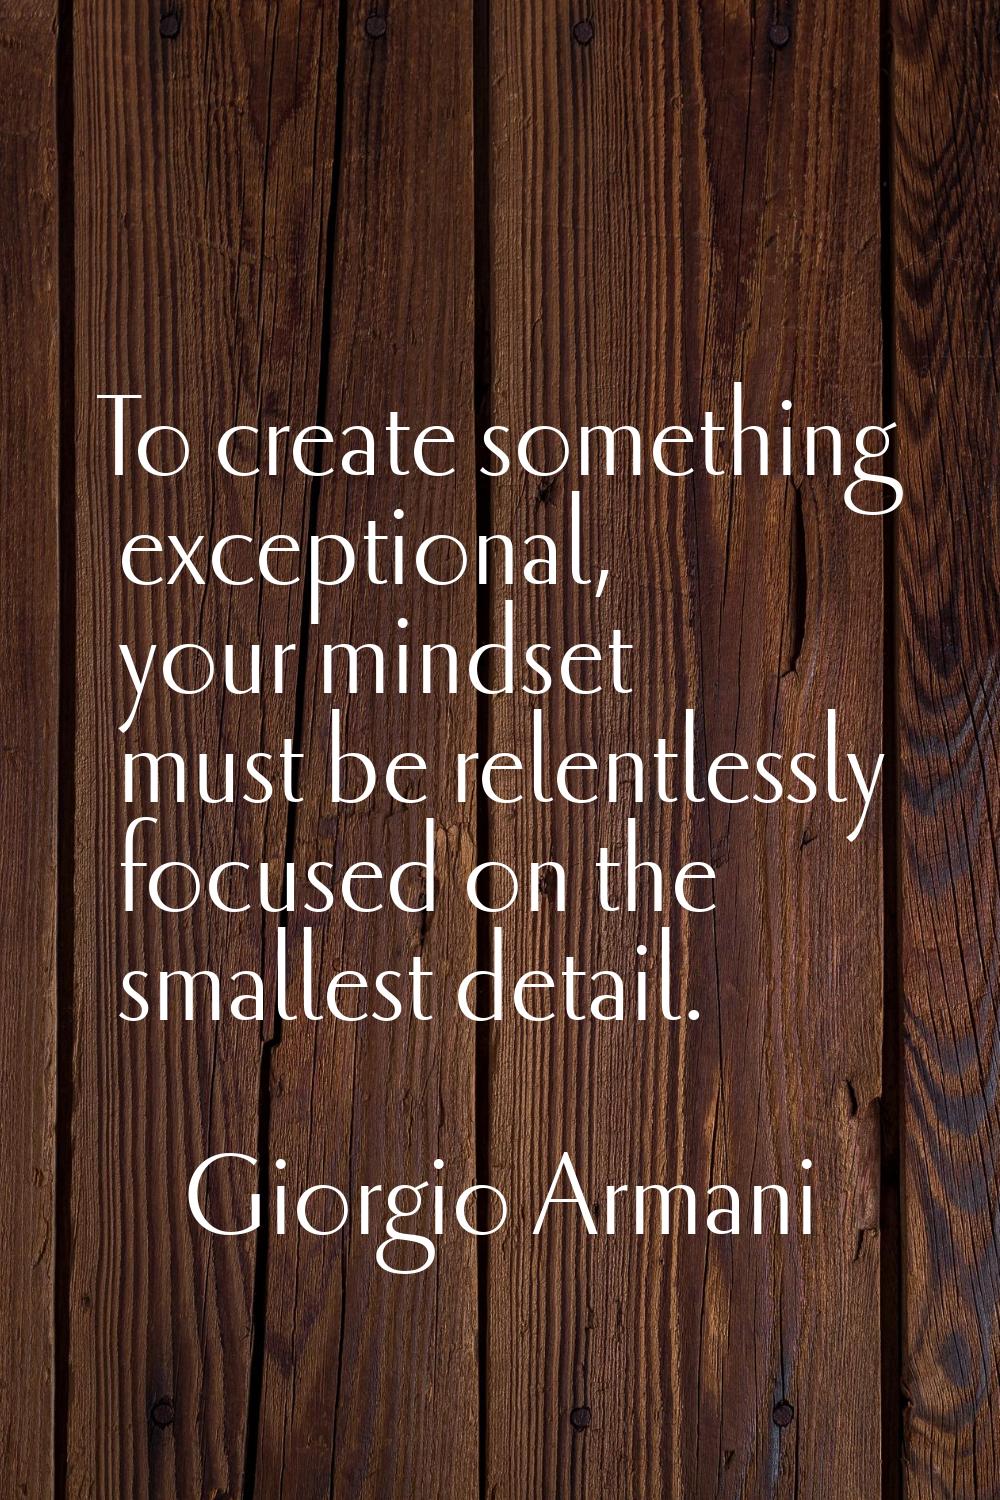 To create something exceptional, your mindset must be relentlessly focused on the smallest detail.